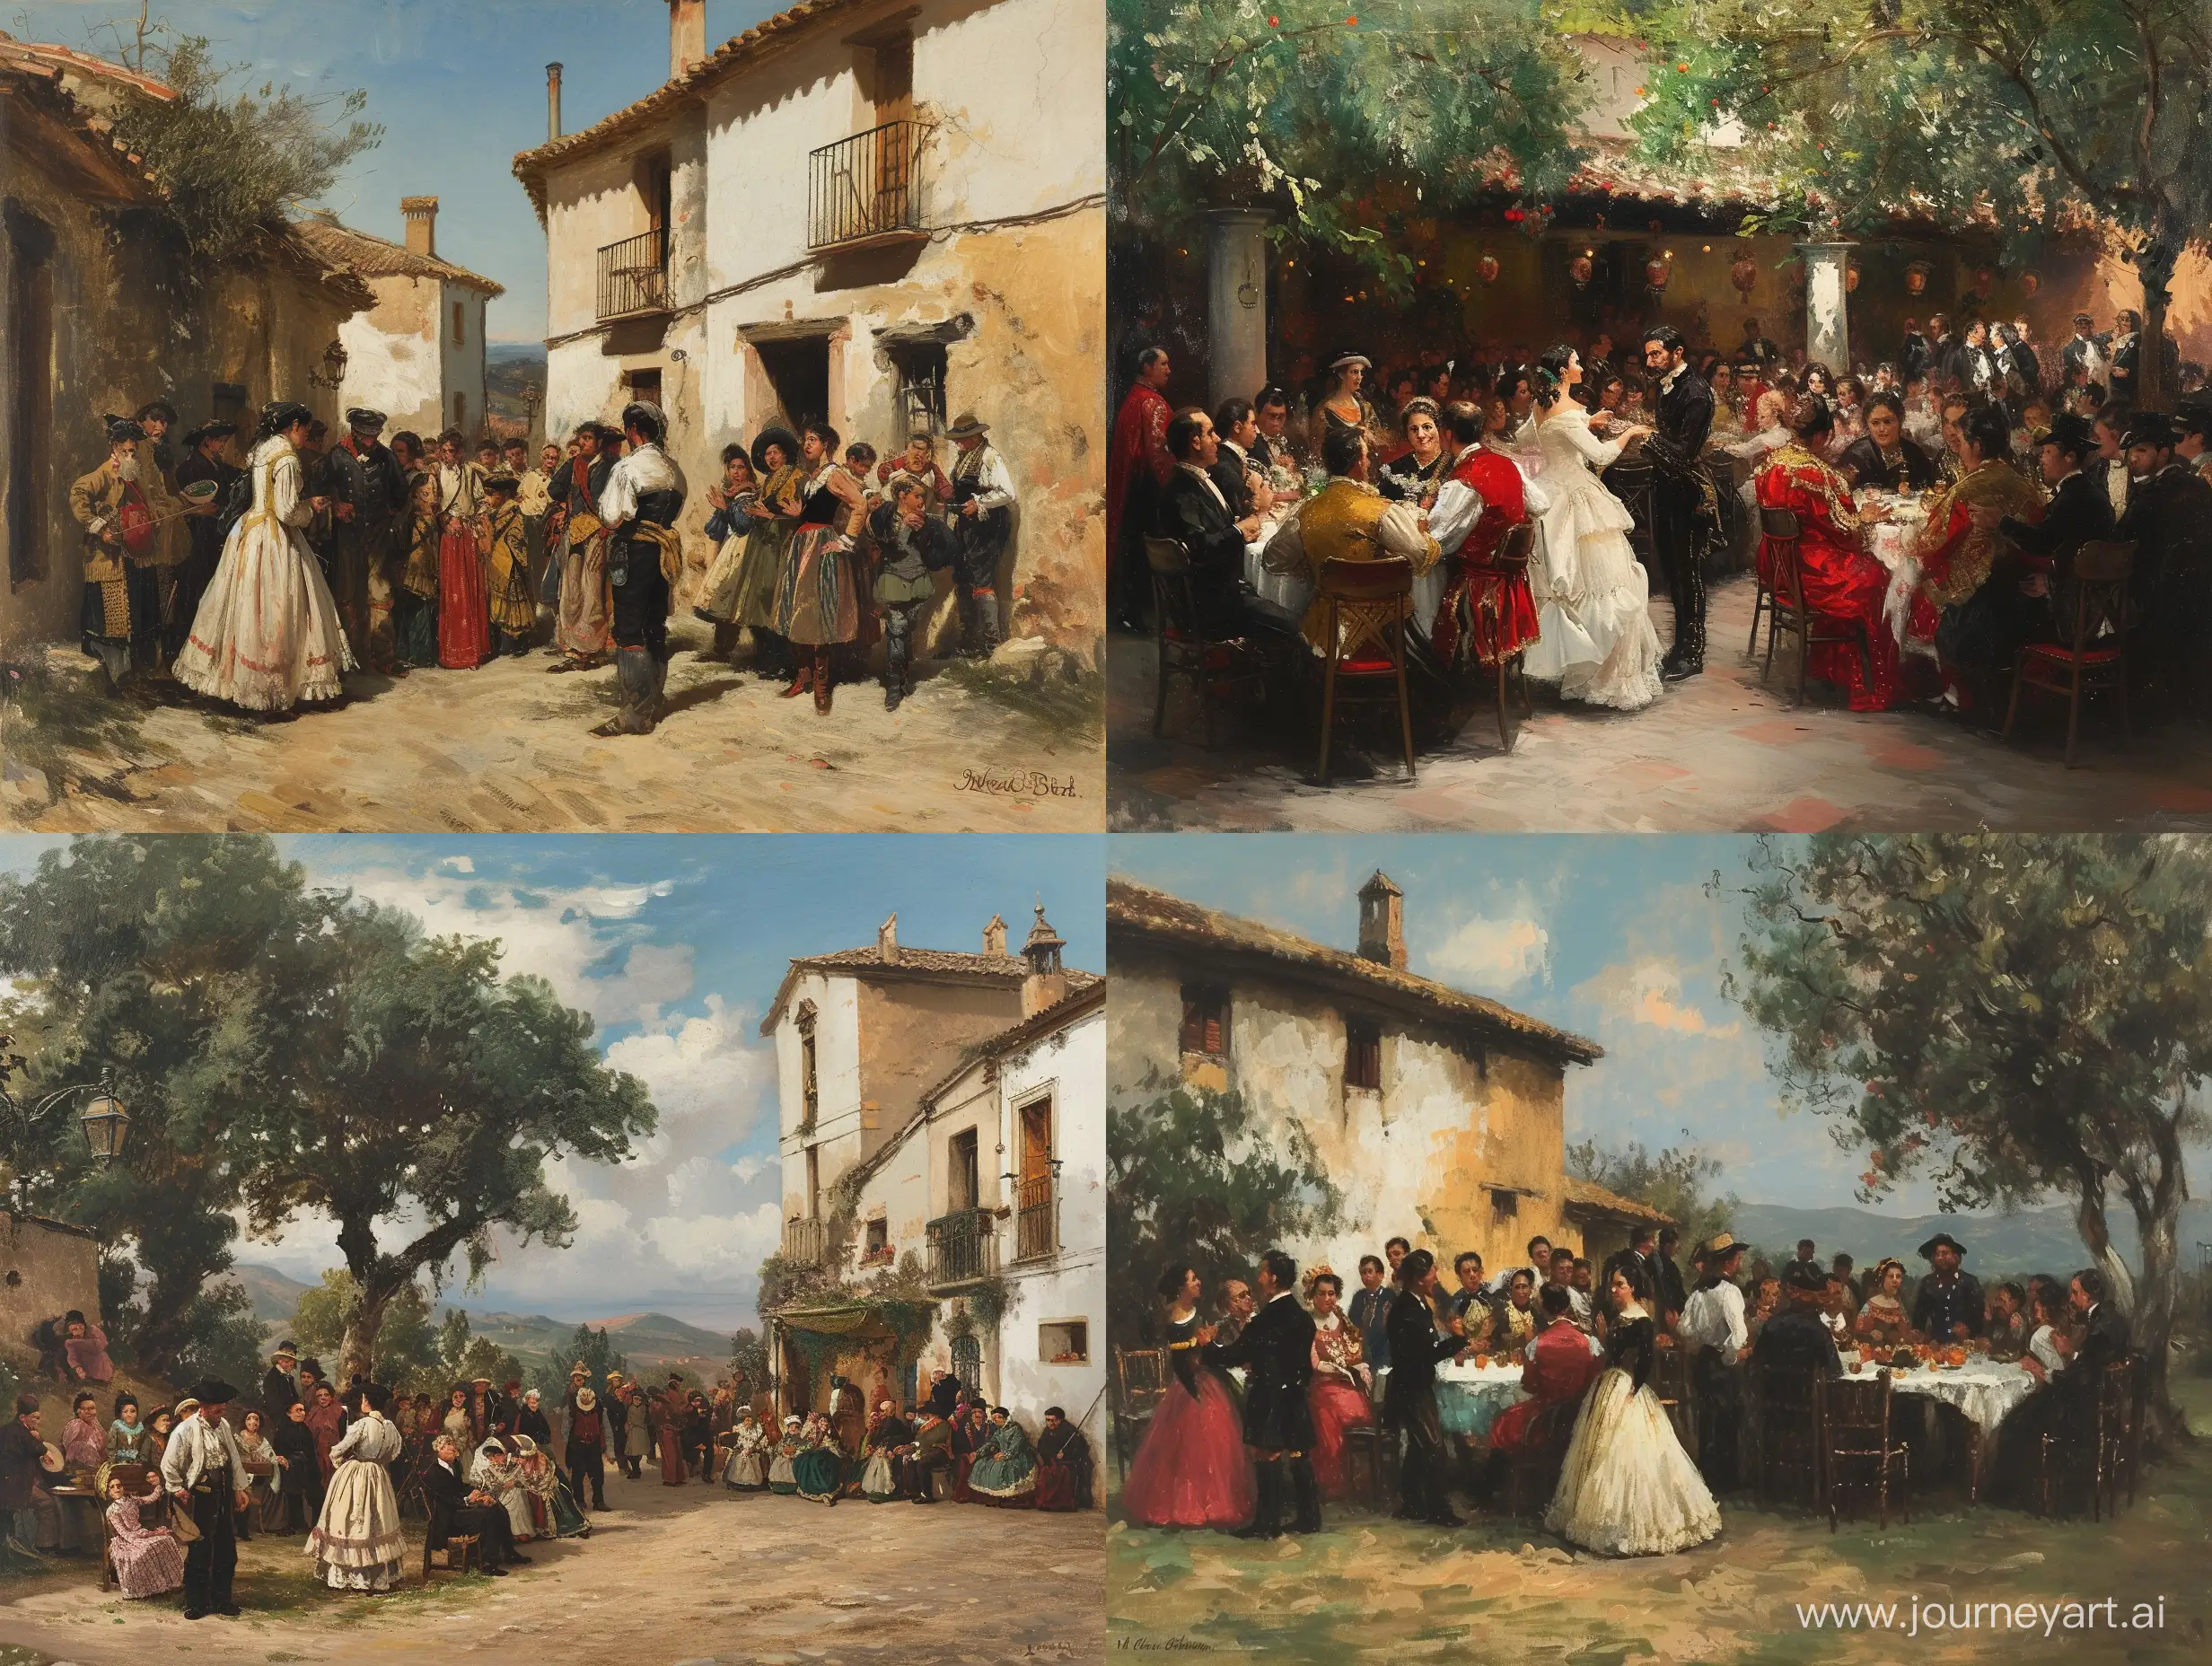 Historical-Gathering-in-19th-Century-Spain-Elegance-and-Tradition-Captured